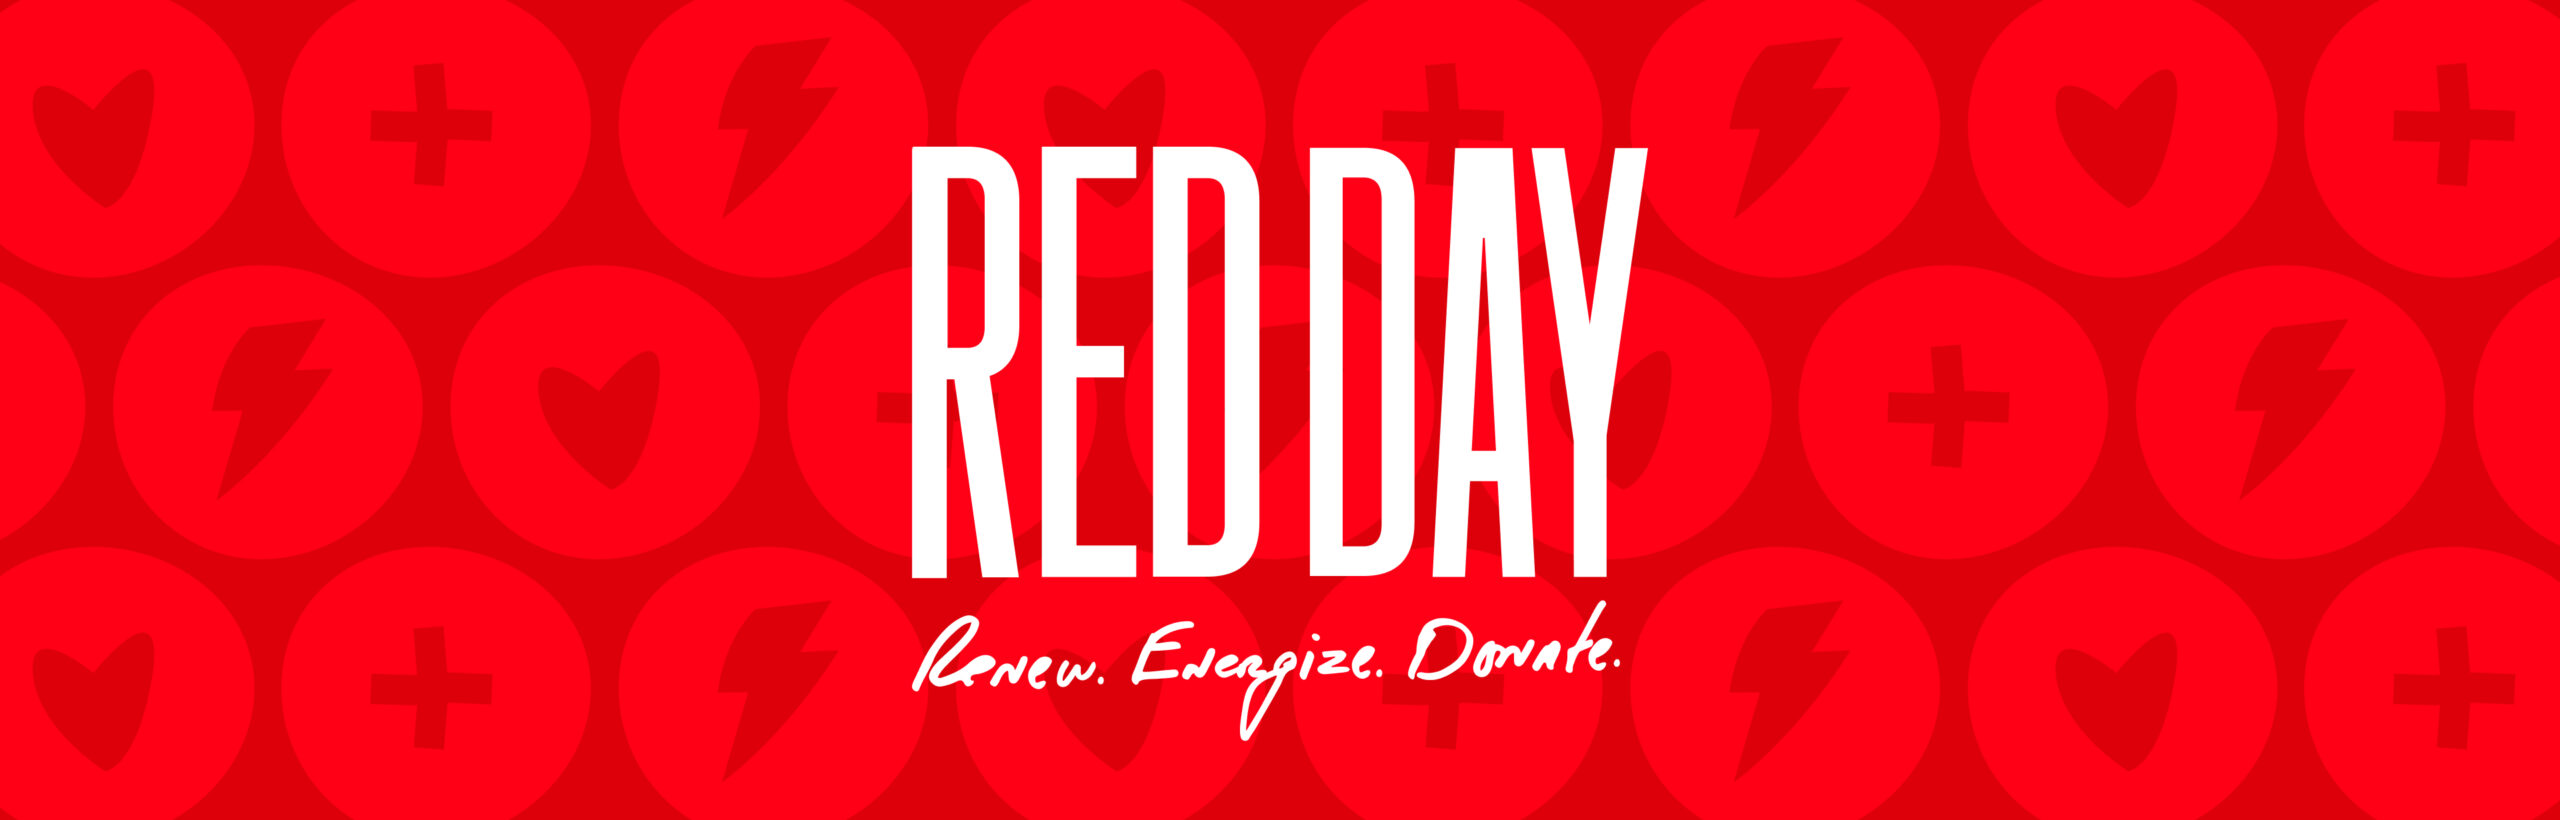 RED Day - Renew. Energize. Donate.